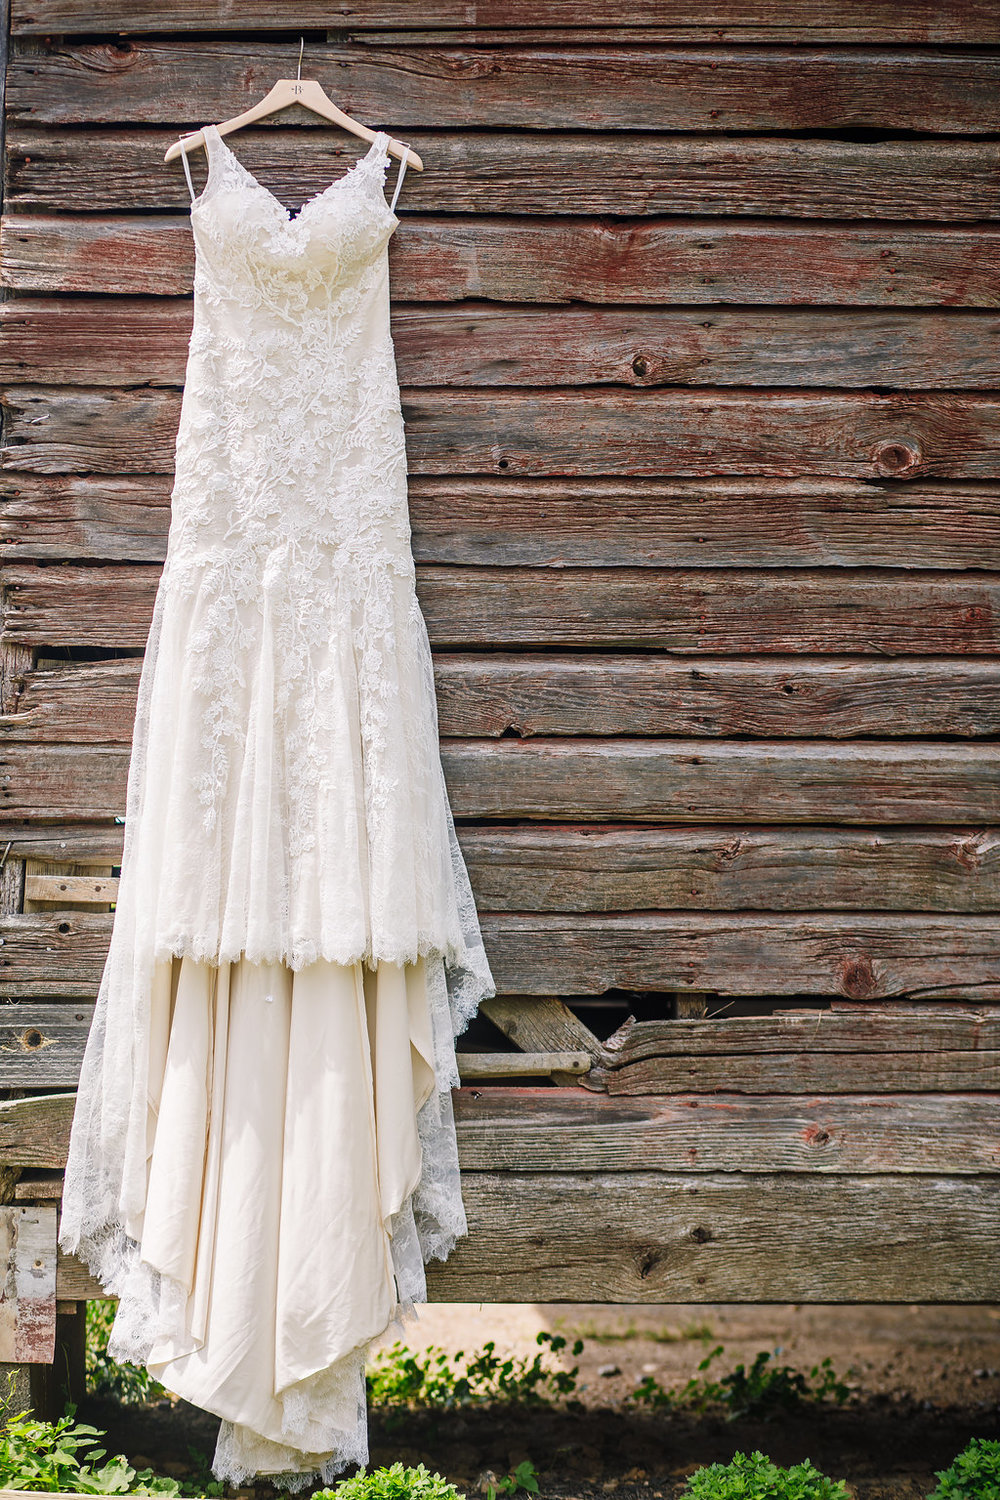 brielle-davis-events-photography-by-brea-linganore-winery-james-sarah-wedding-dress.jpg